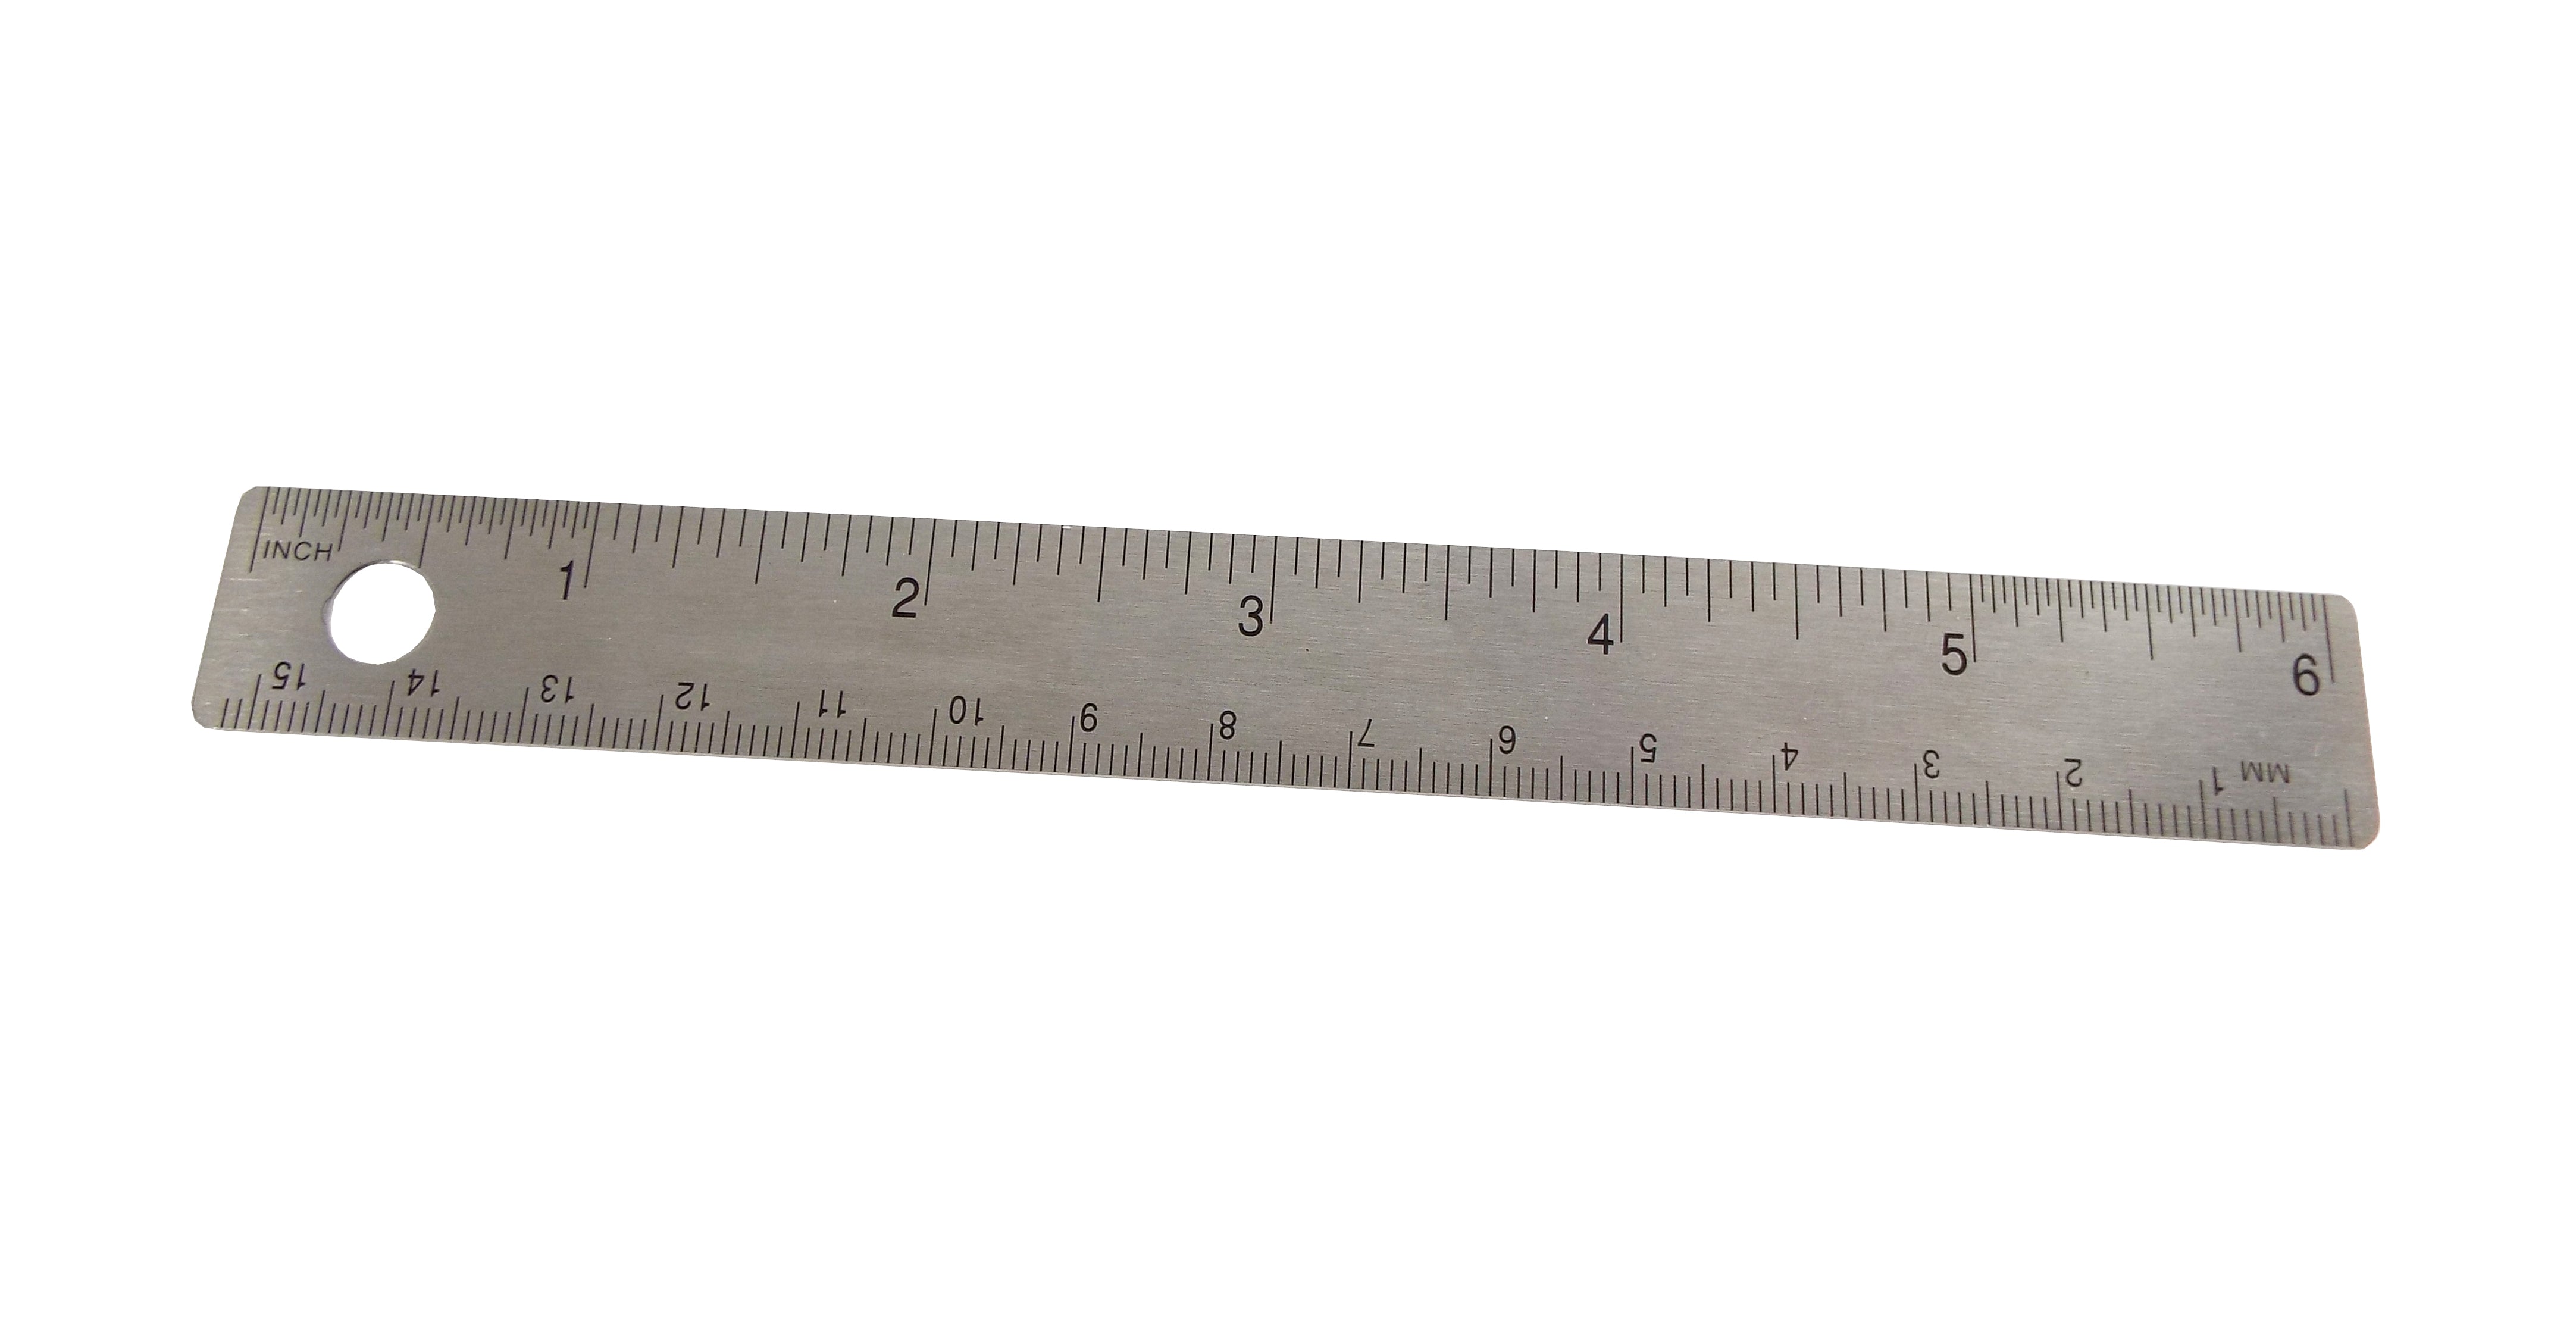 6 Mini Stainless Steel Ruler with Pocket Clip